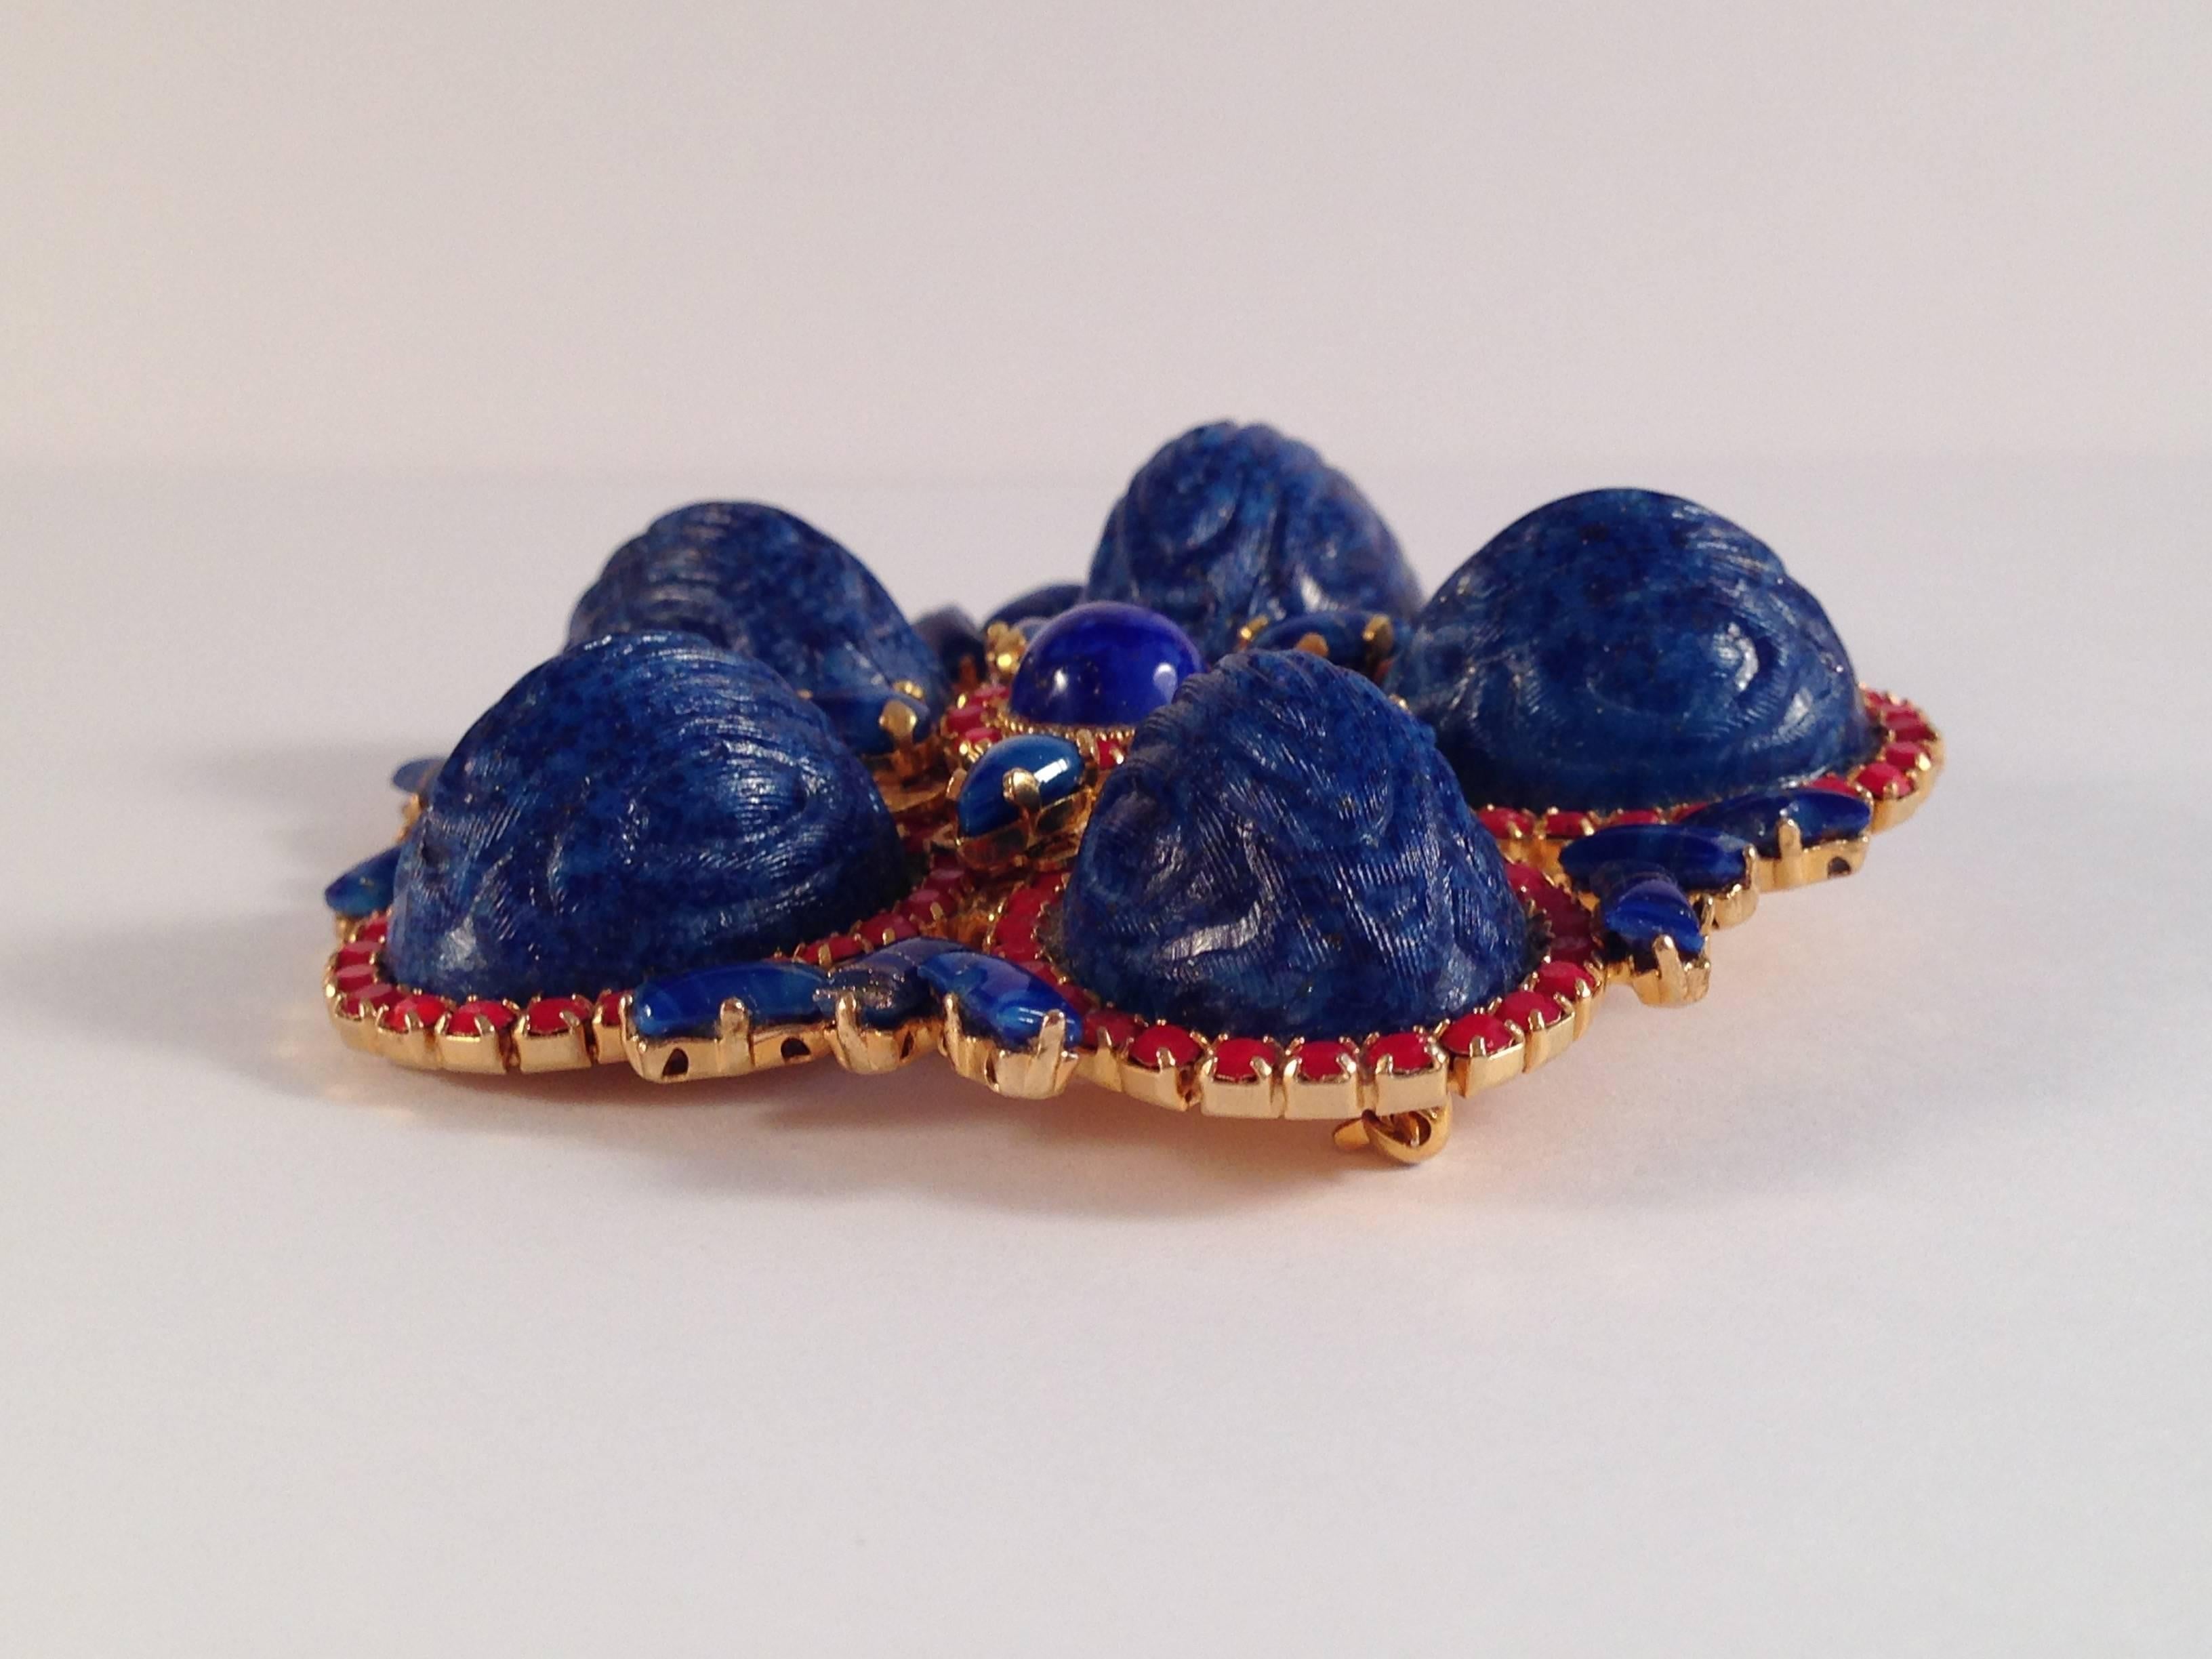 This is a rare and beautiful blue and red glass brooch designed by William de Lillo in 1971. It comes from the William de Lillo archives of samples and prototypes. This brooch is part of a set that include a matching necklace and earrings which I